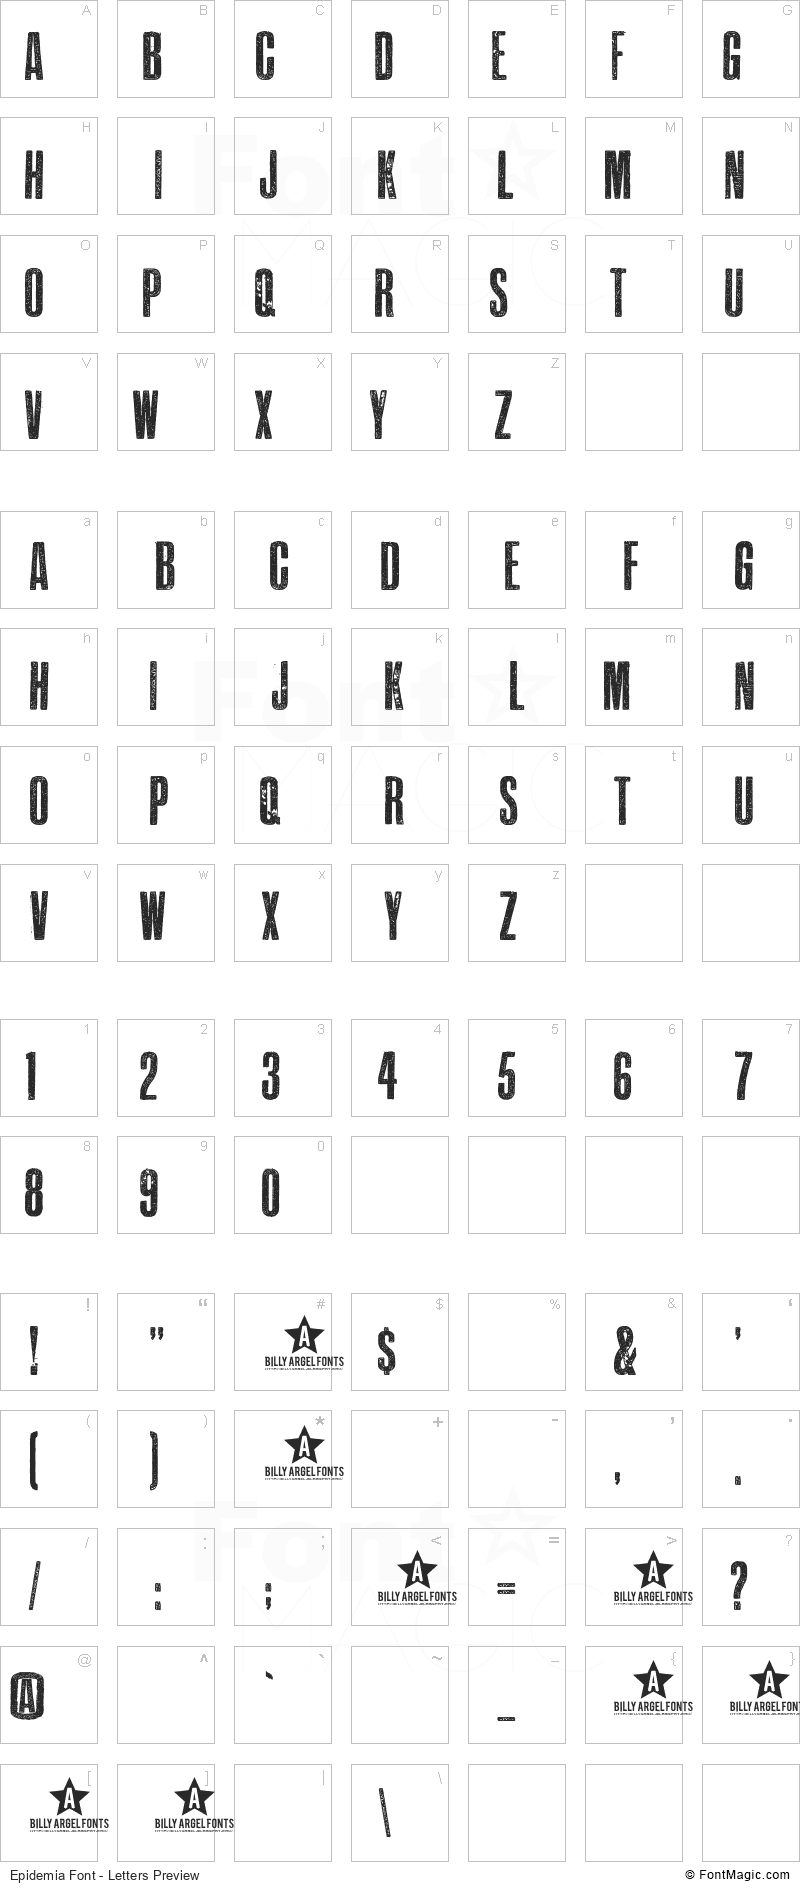 Epidemia Font - All Latters Preview Chart